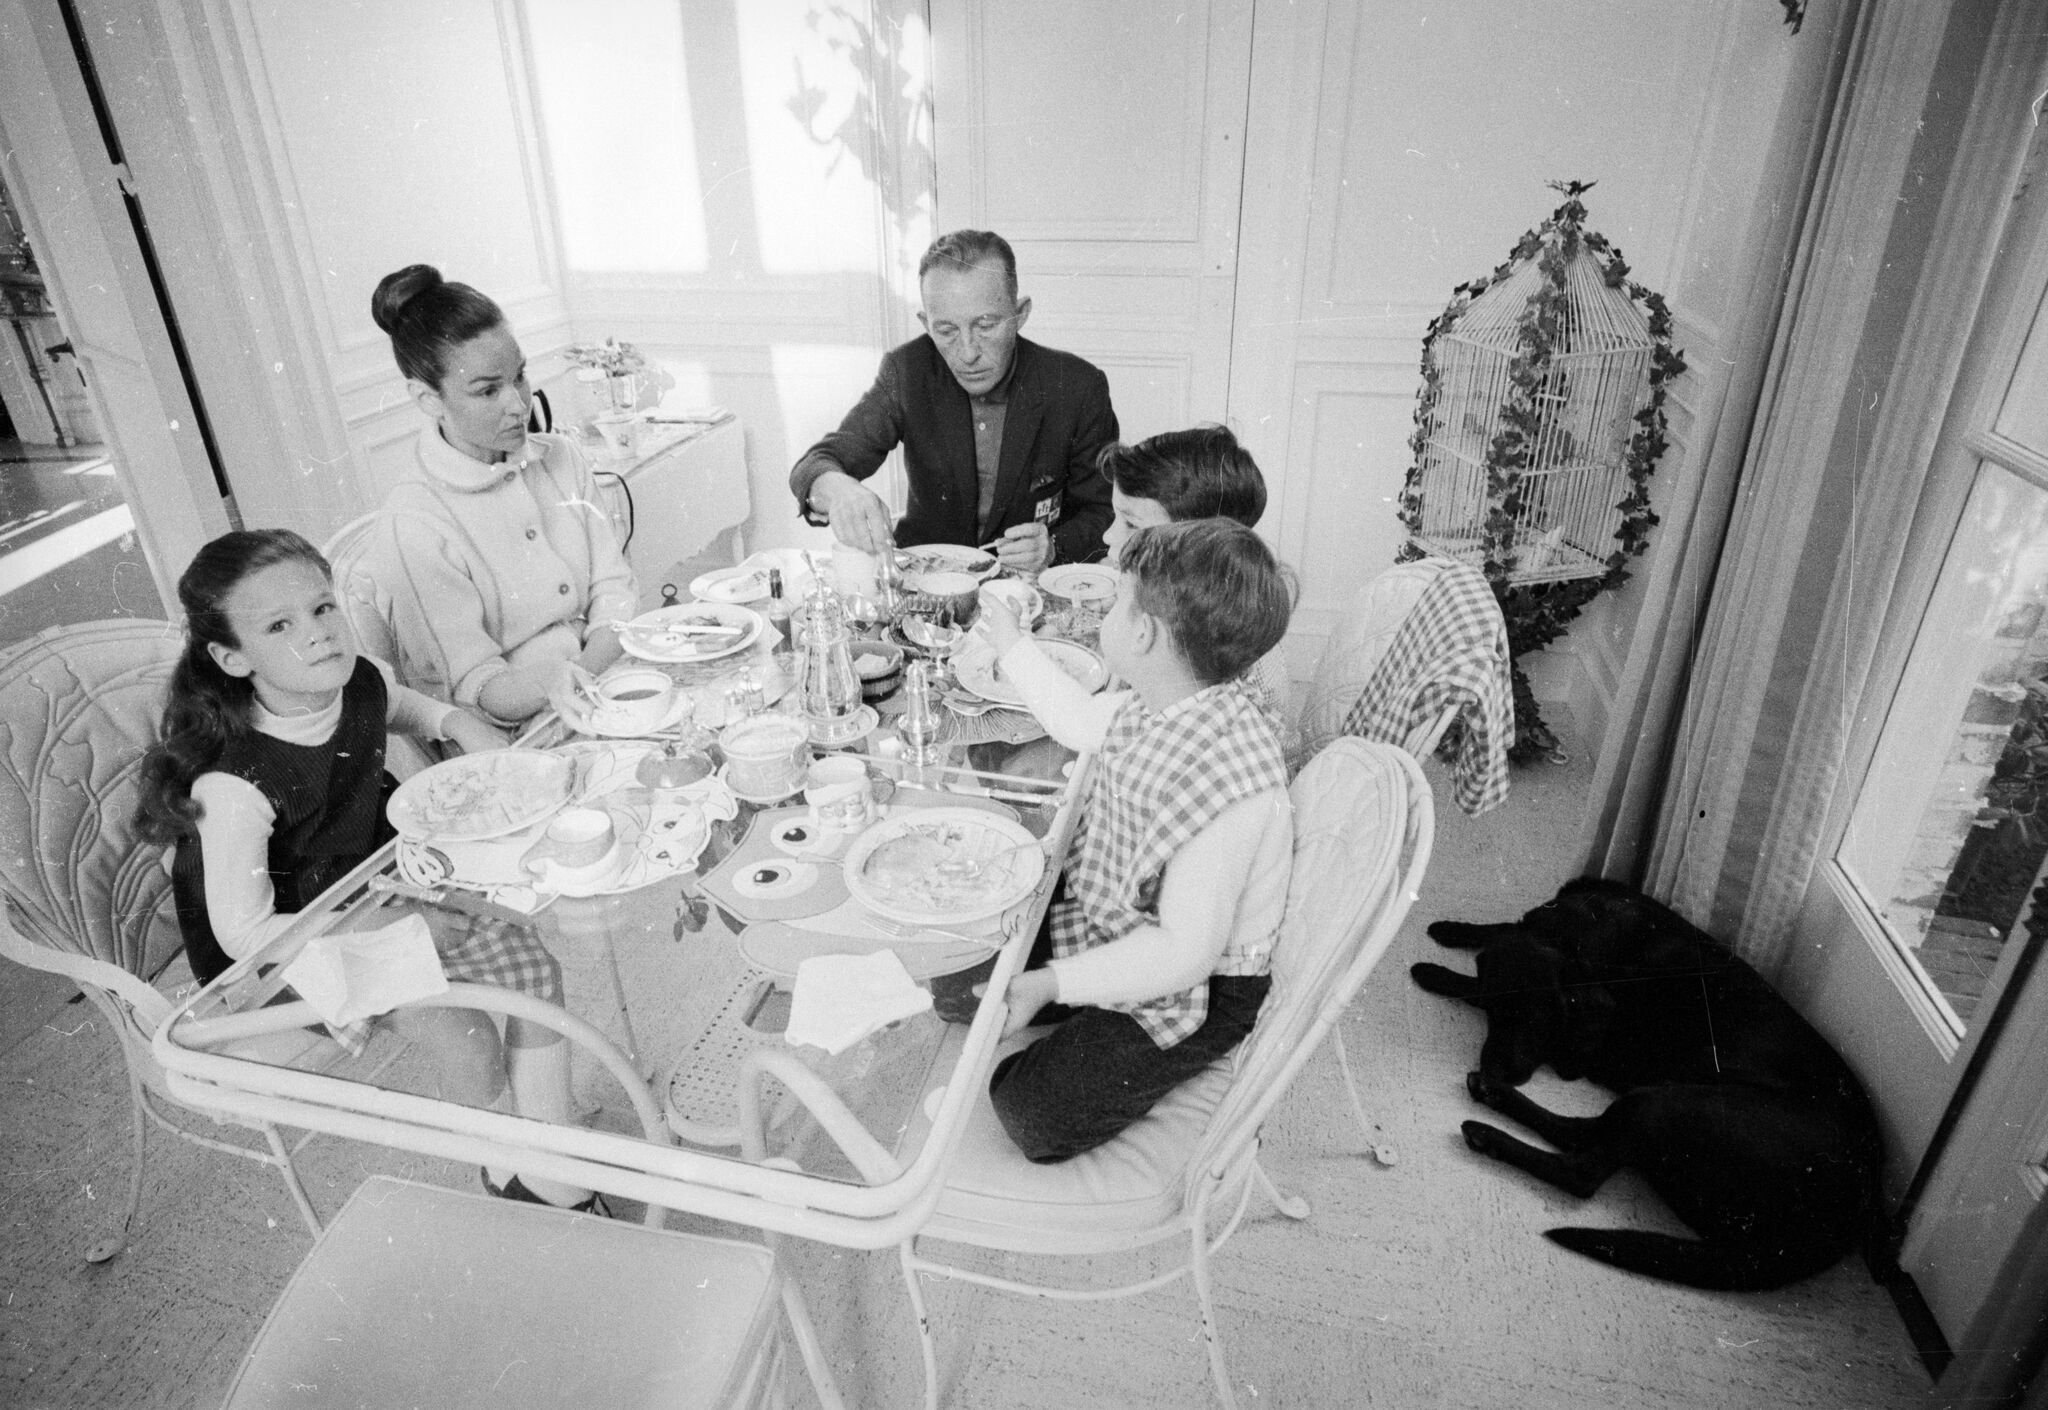 Bing Crosby (1901 - 1977) at his home in San Francisco with his sons Nathaniel and Harry and his daughter, Mary. | Source: Getty Images